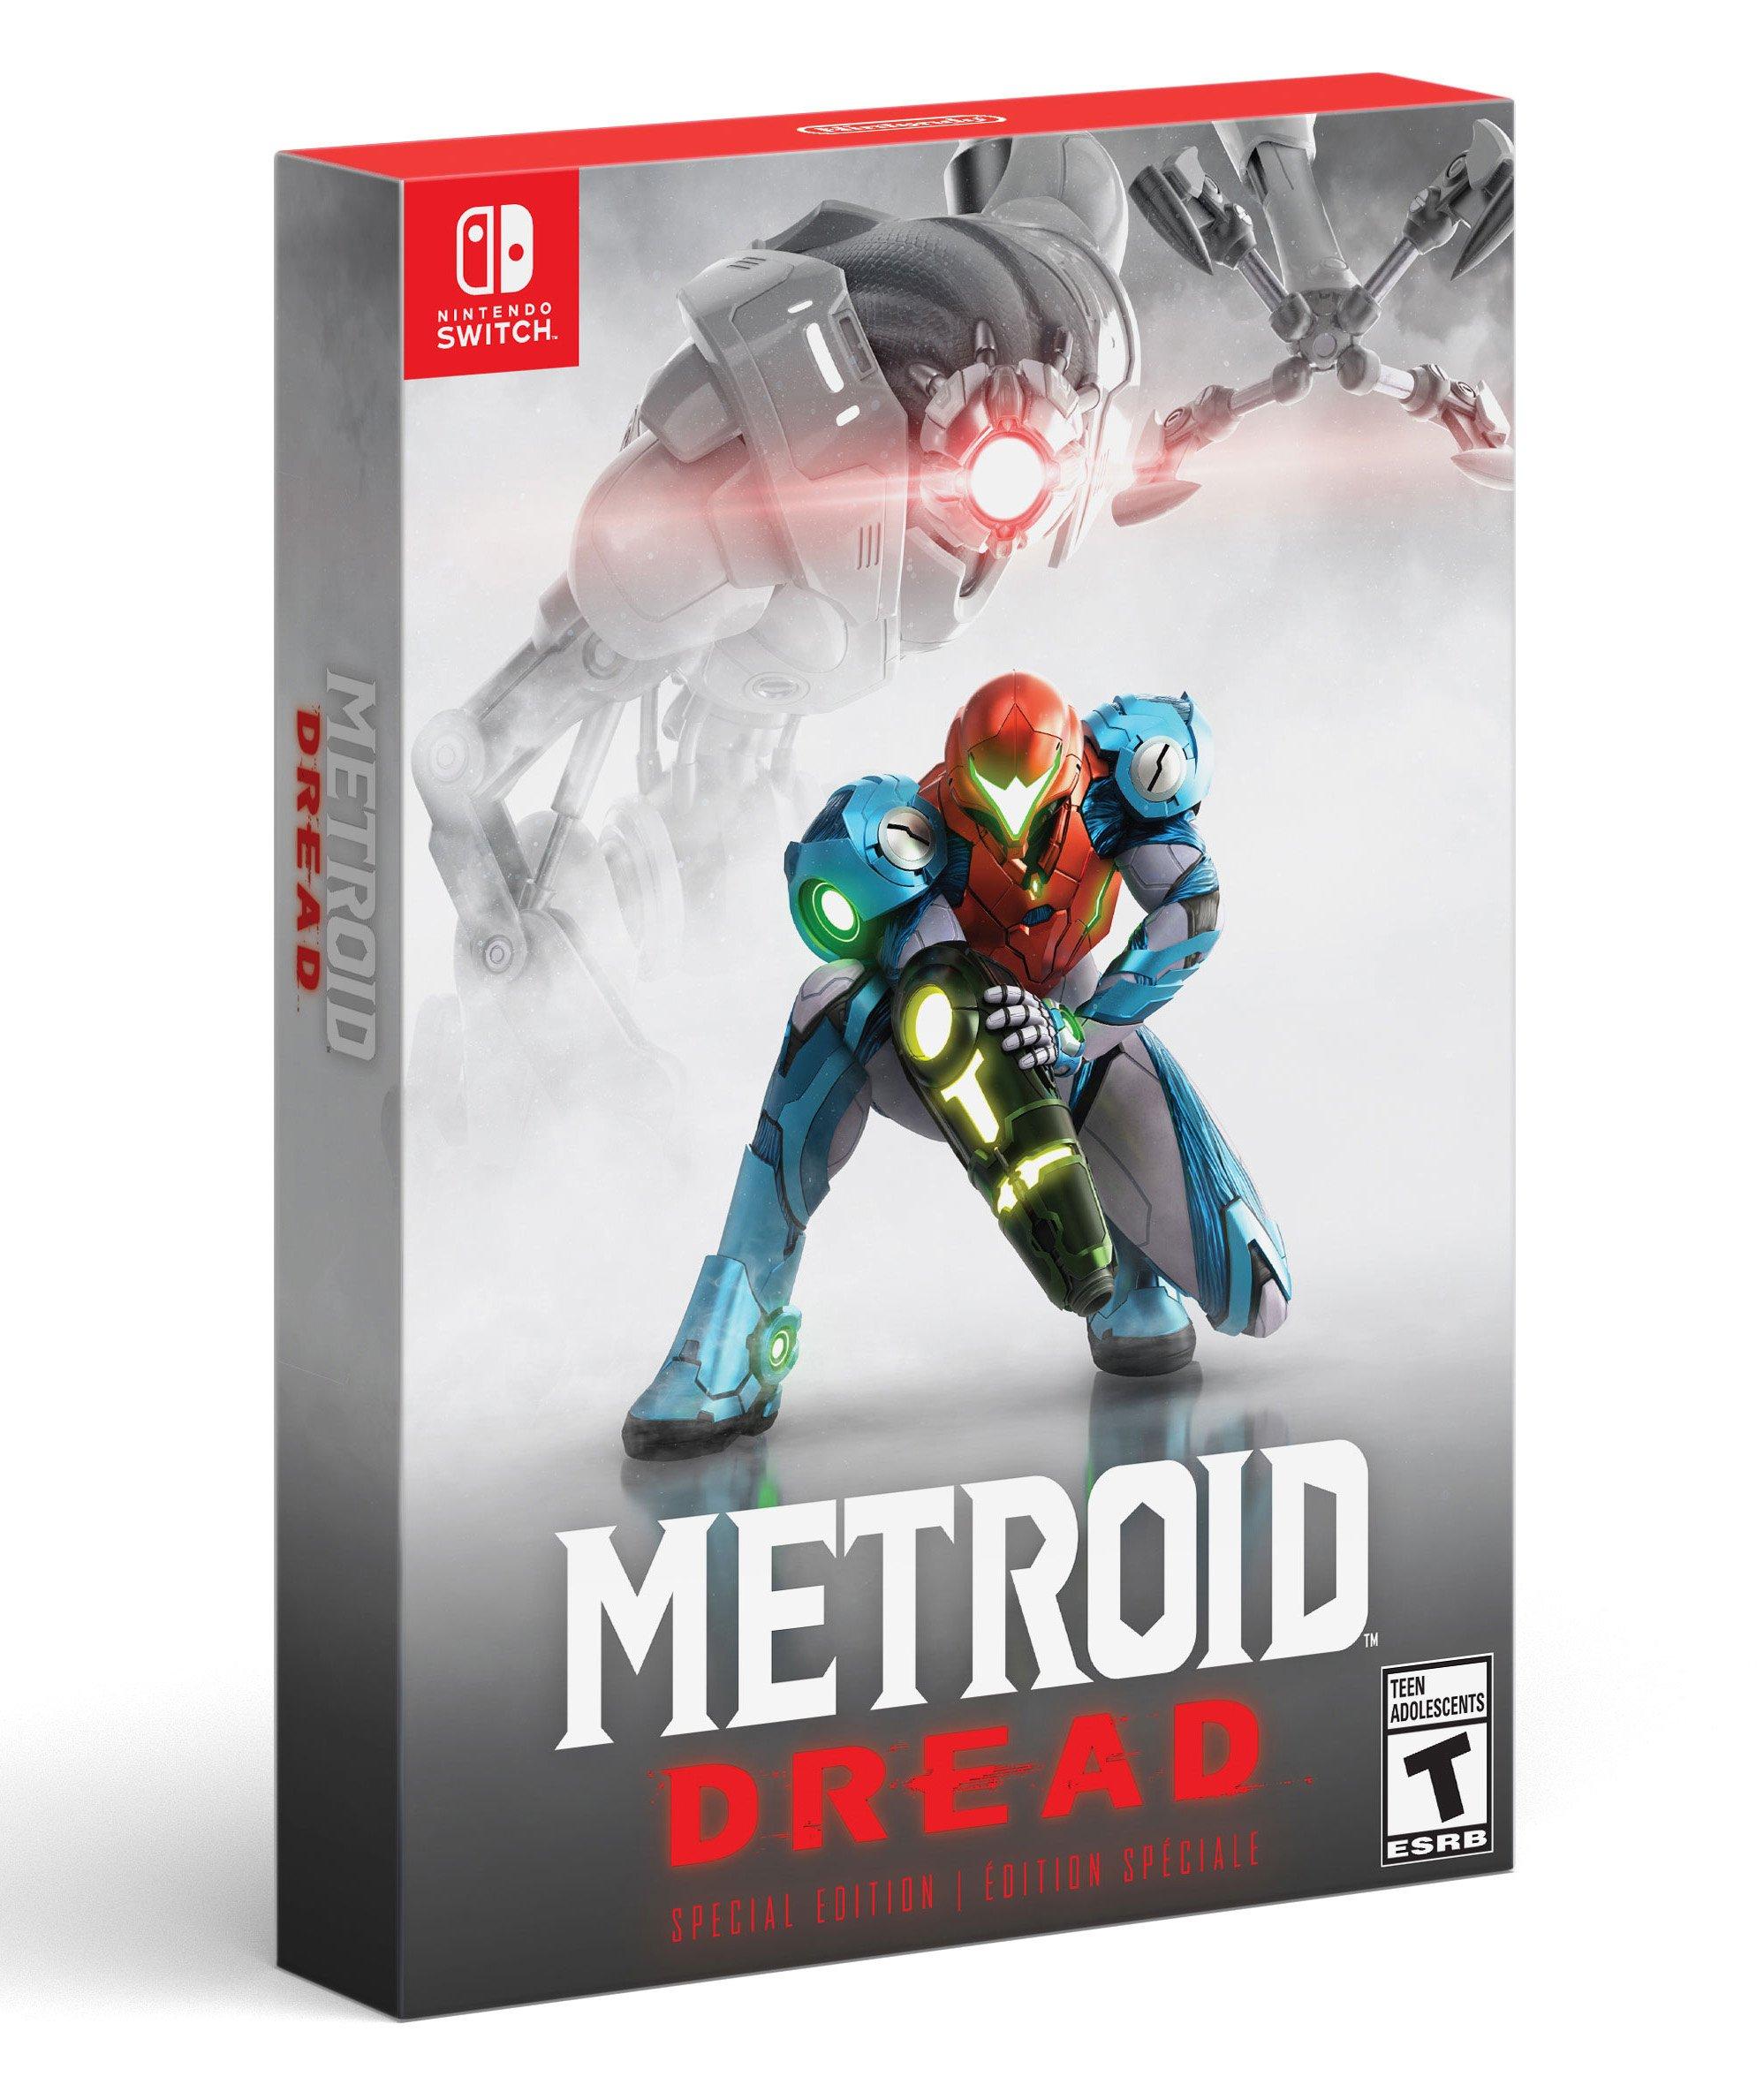 [Image: Metroid-Dread-Special-Edition----Nintendo-Switch]